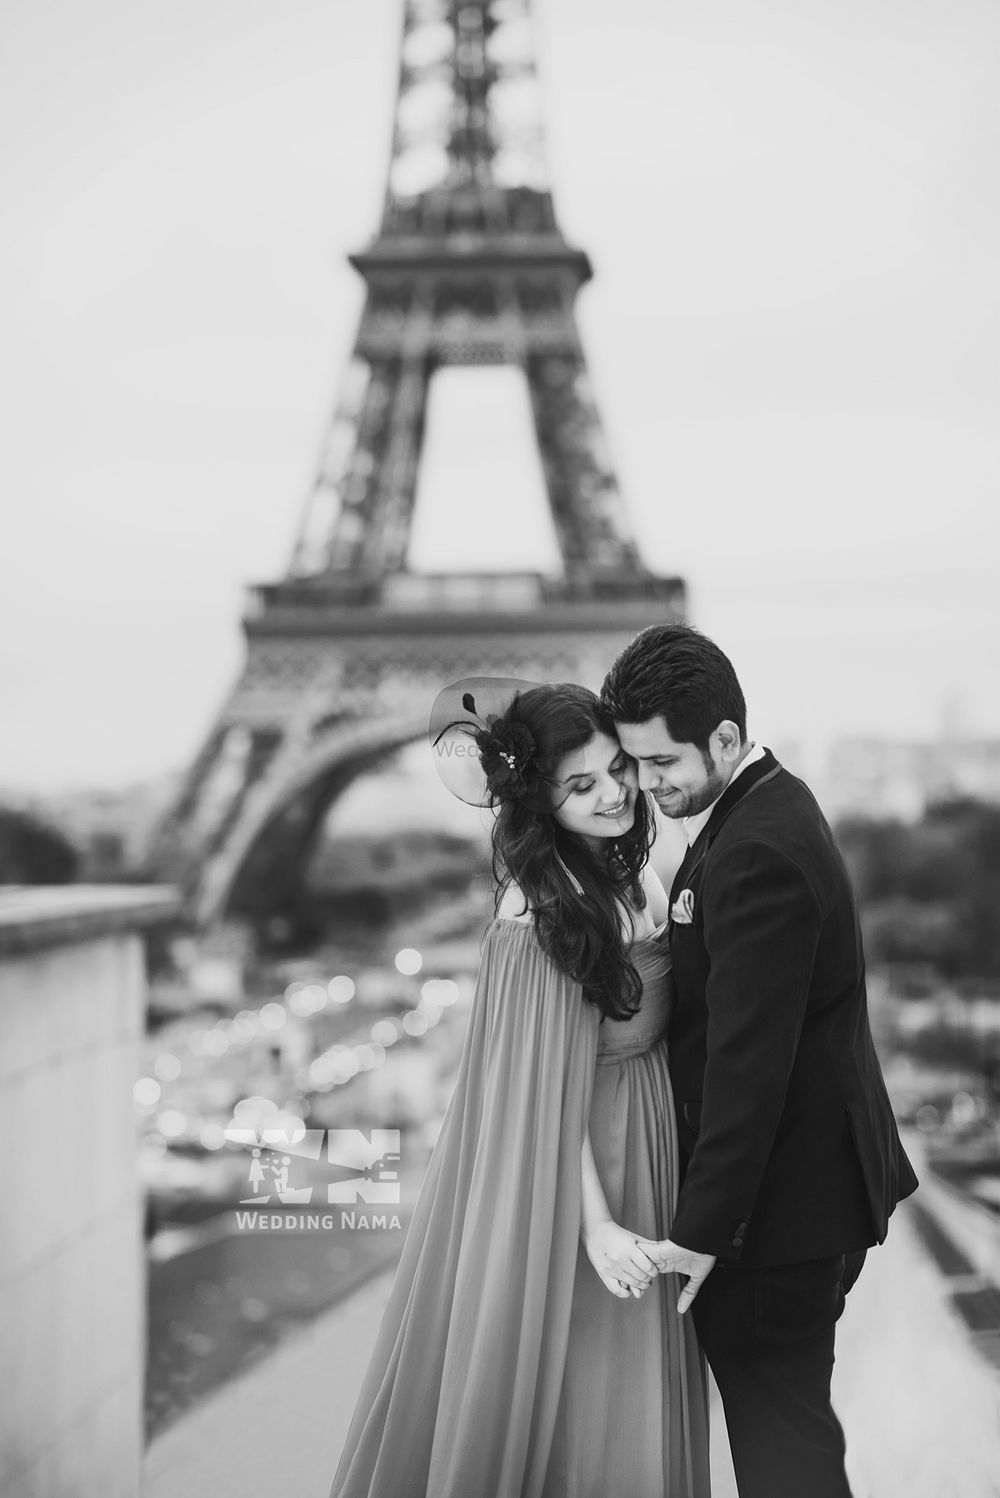 Photo From In the city of Love - By WeddingNama